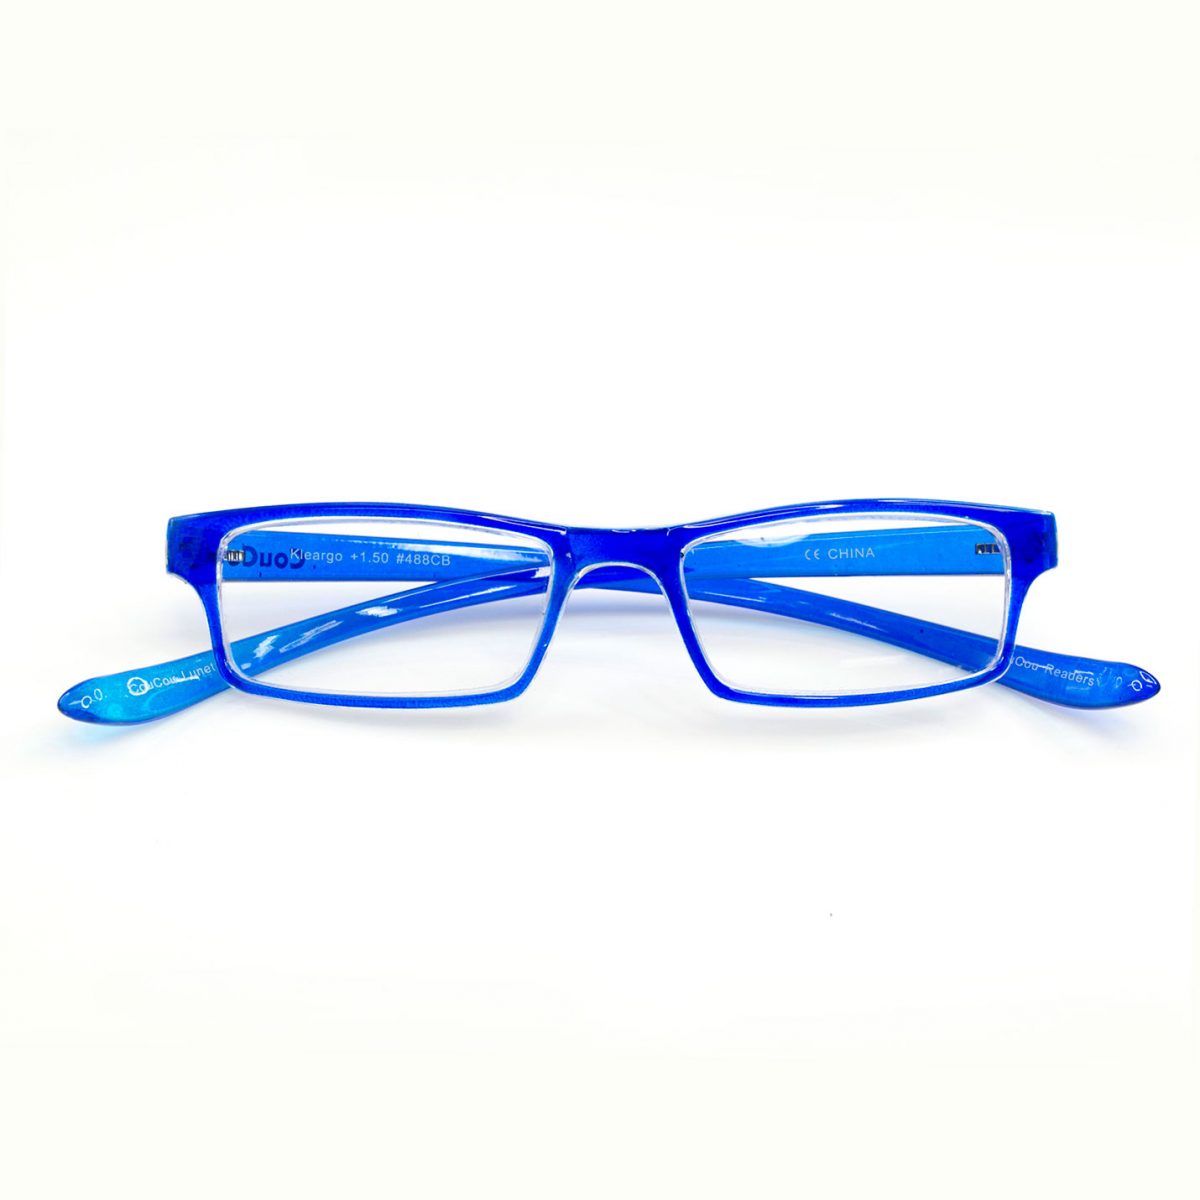 CouCou Readers Crystal Blue